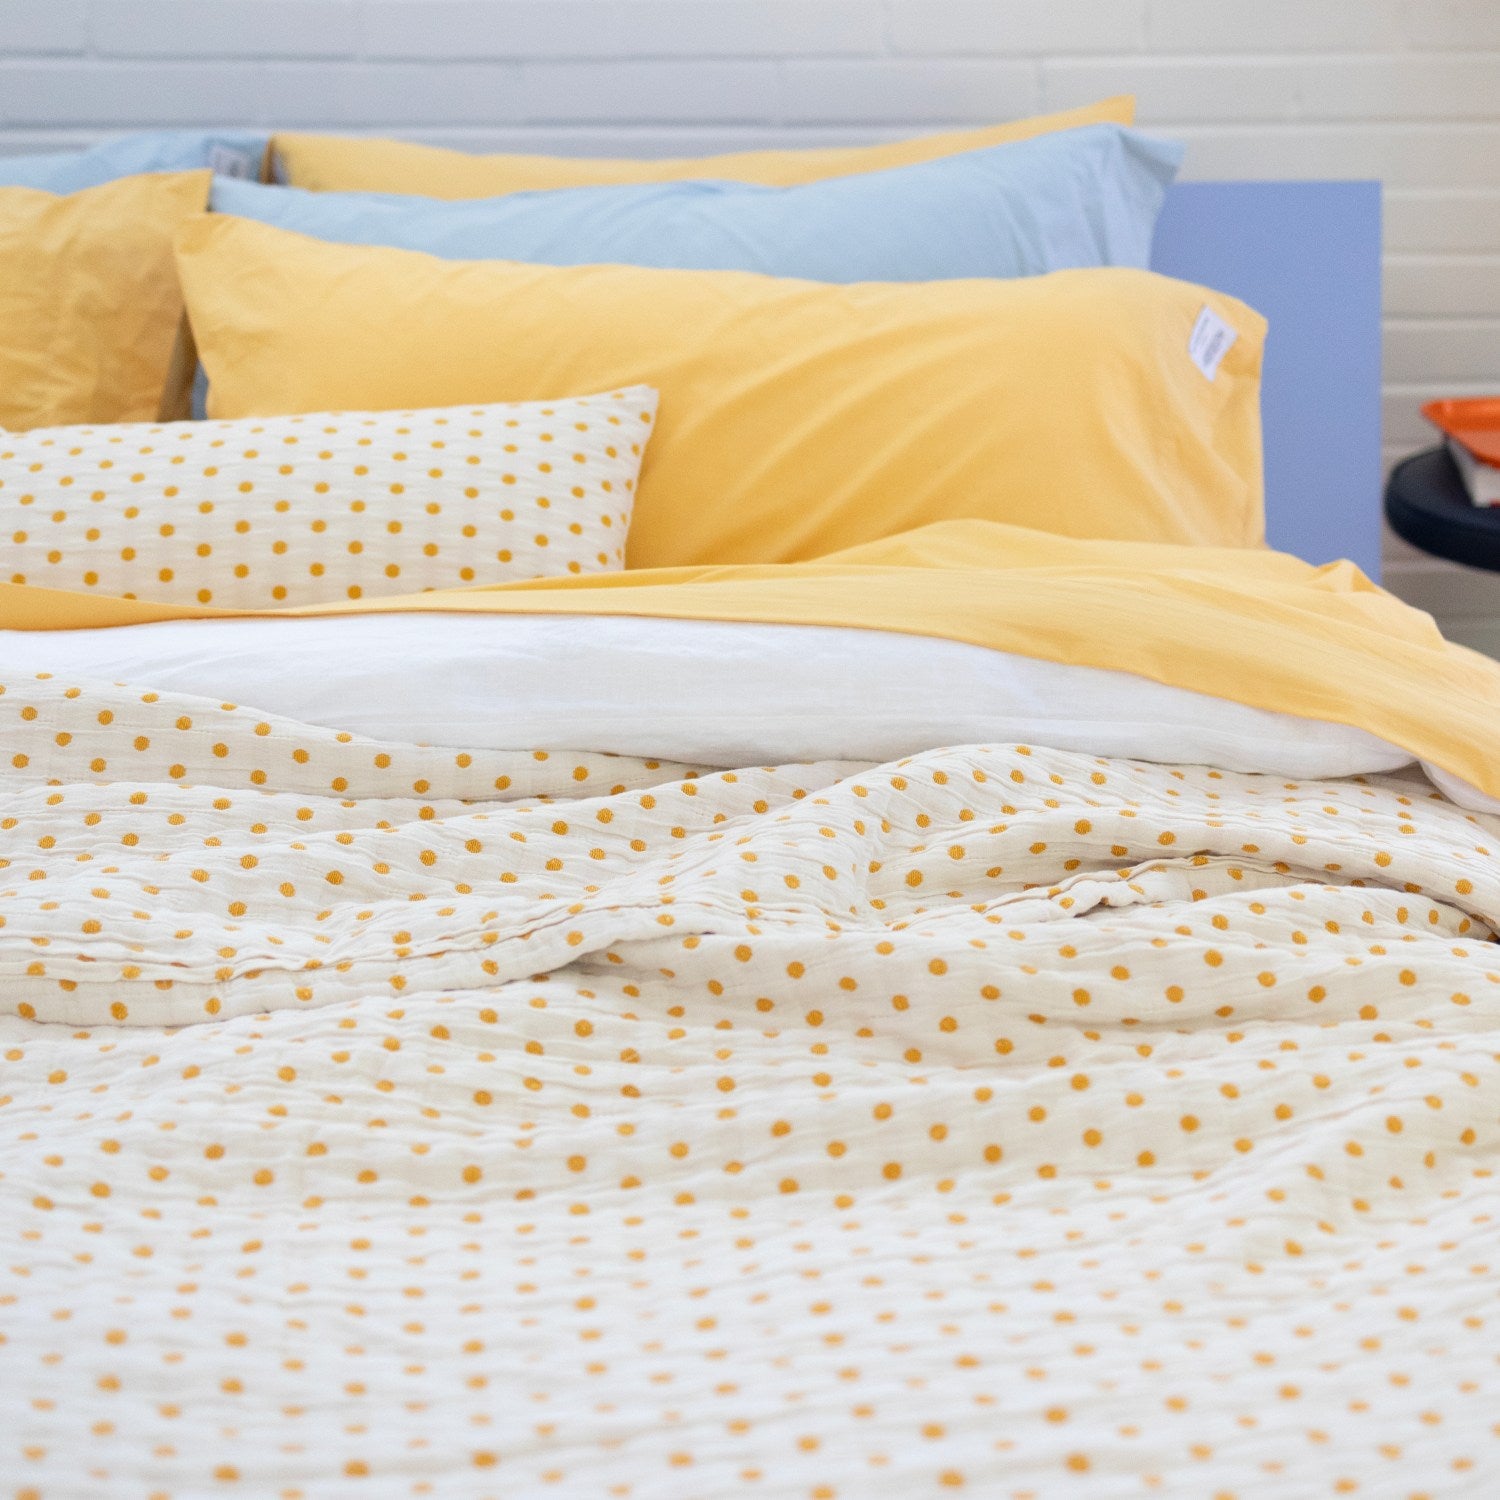 Cozy bed with polka dot quilt. 